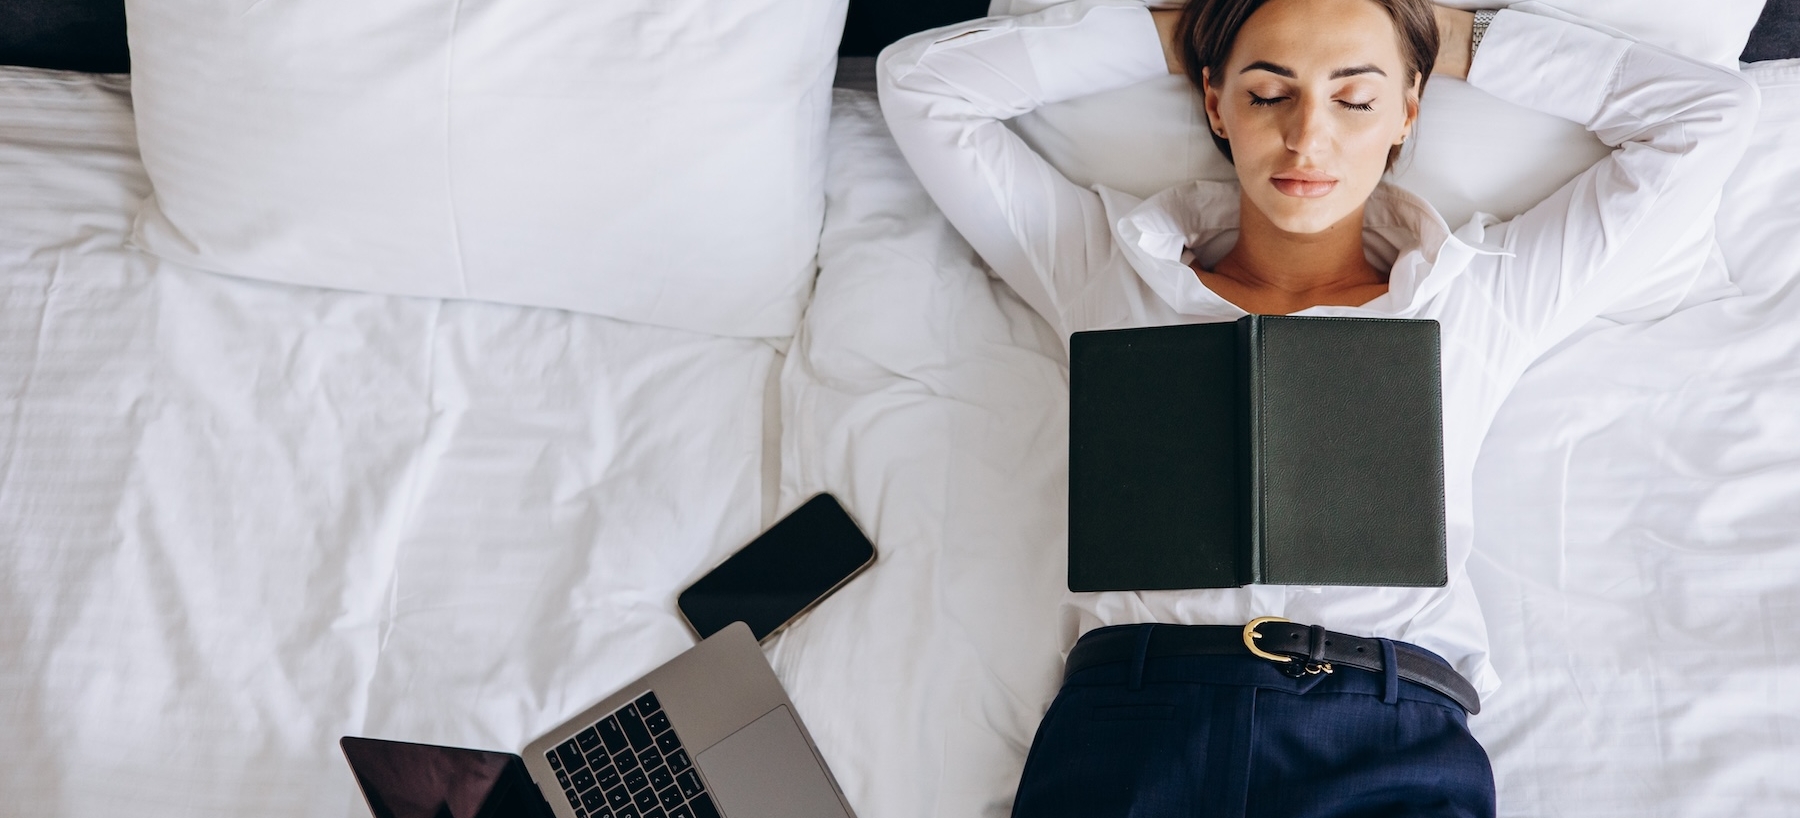 Business woman sleeping in a hotel room with laptop and phone lying on bed